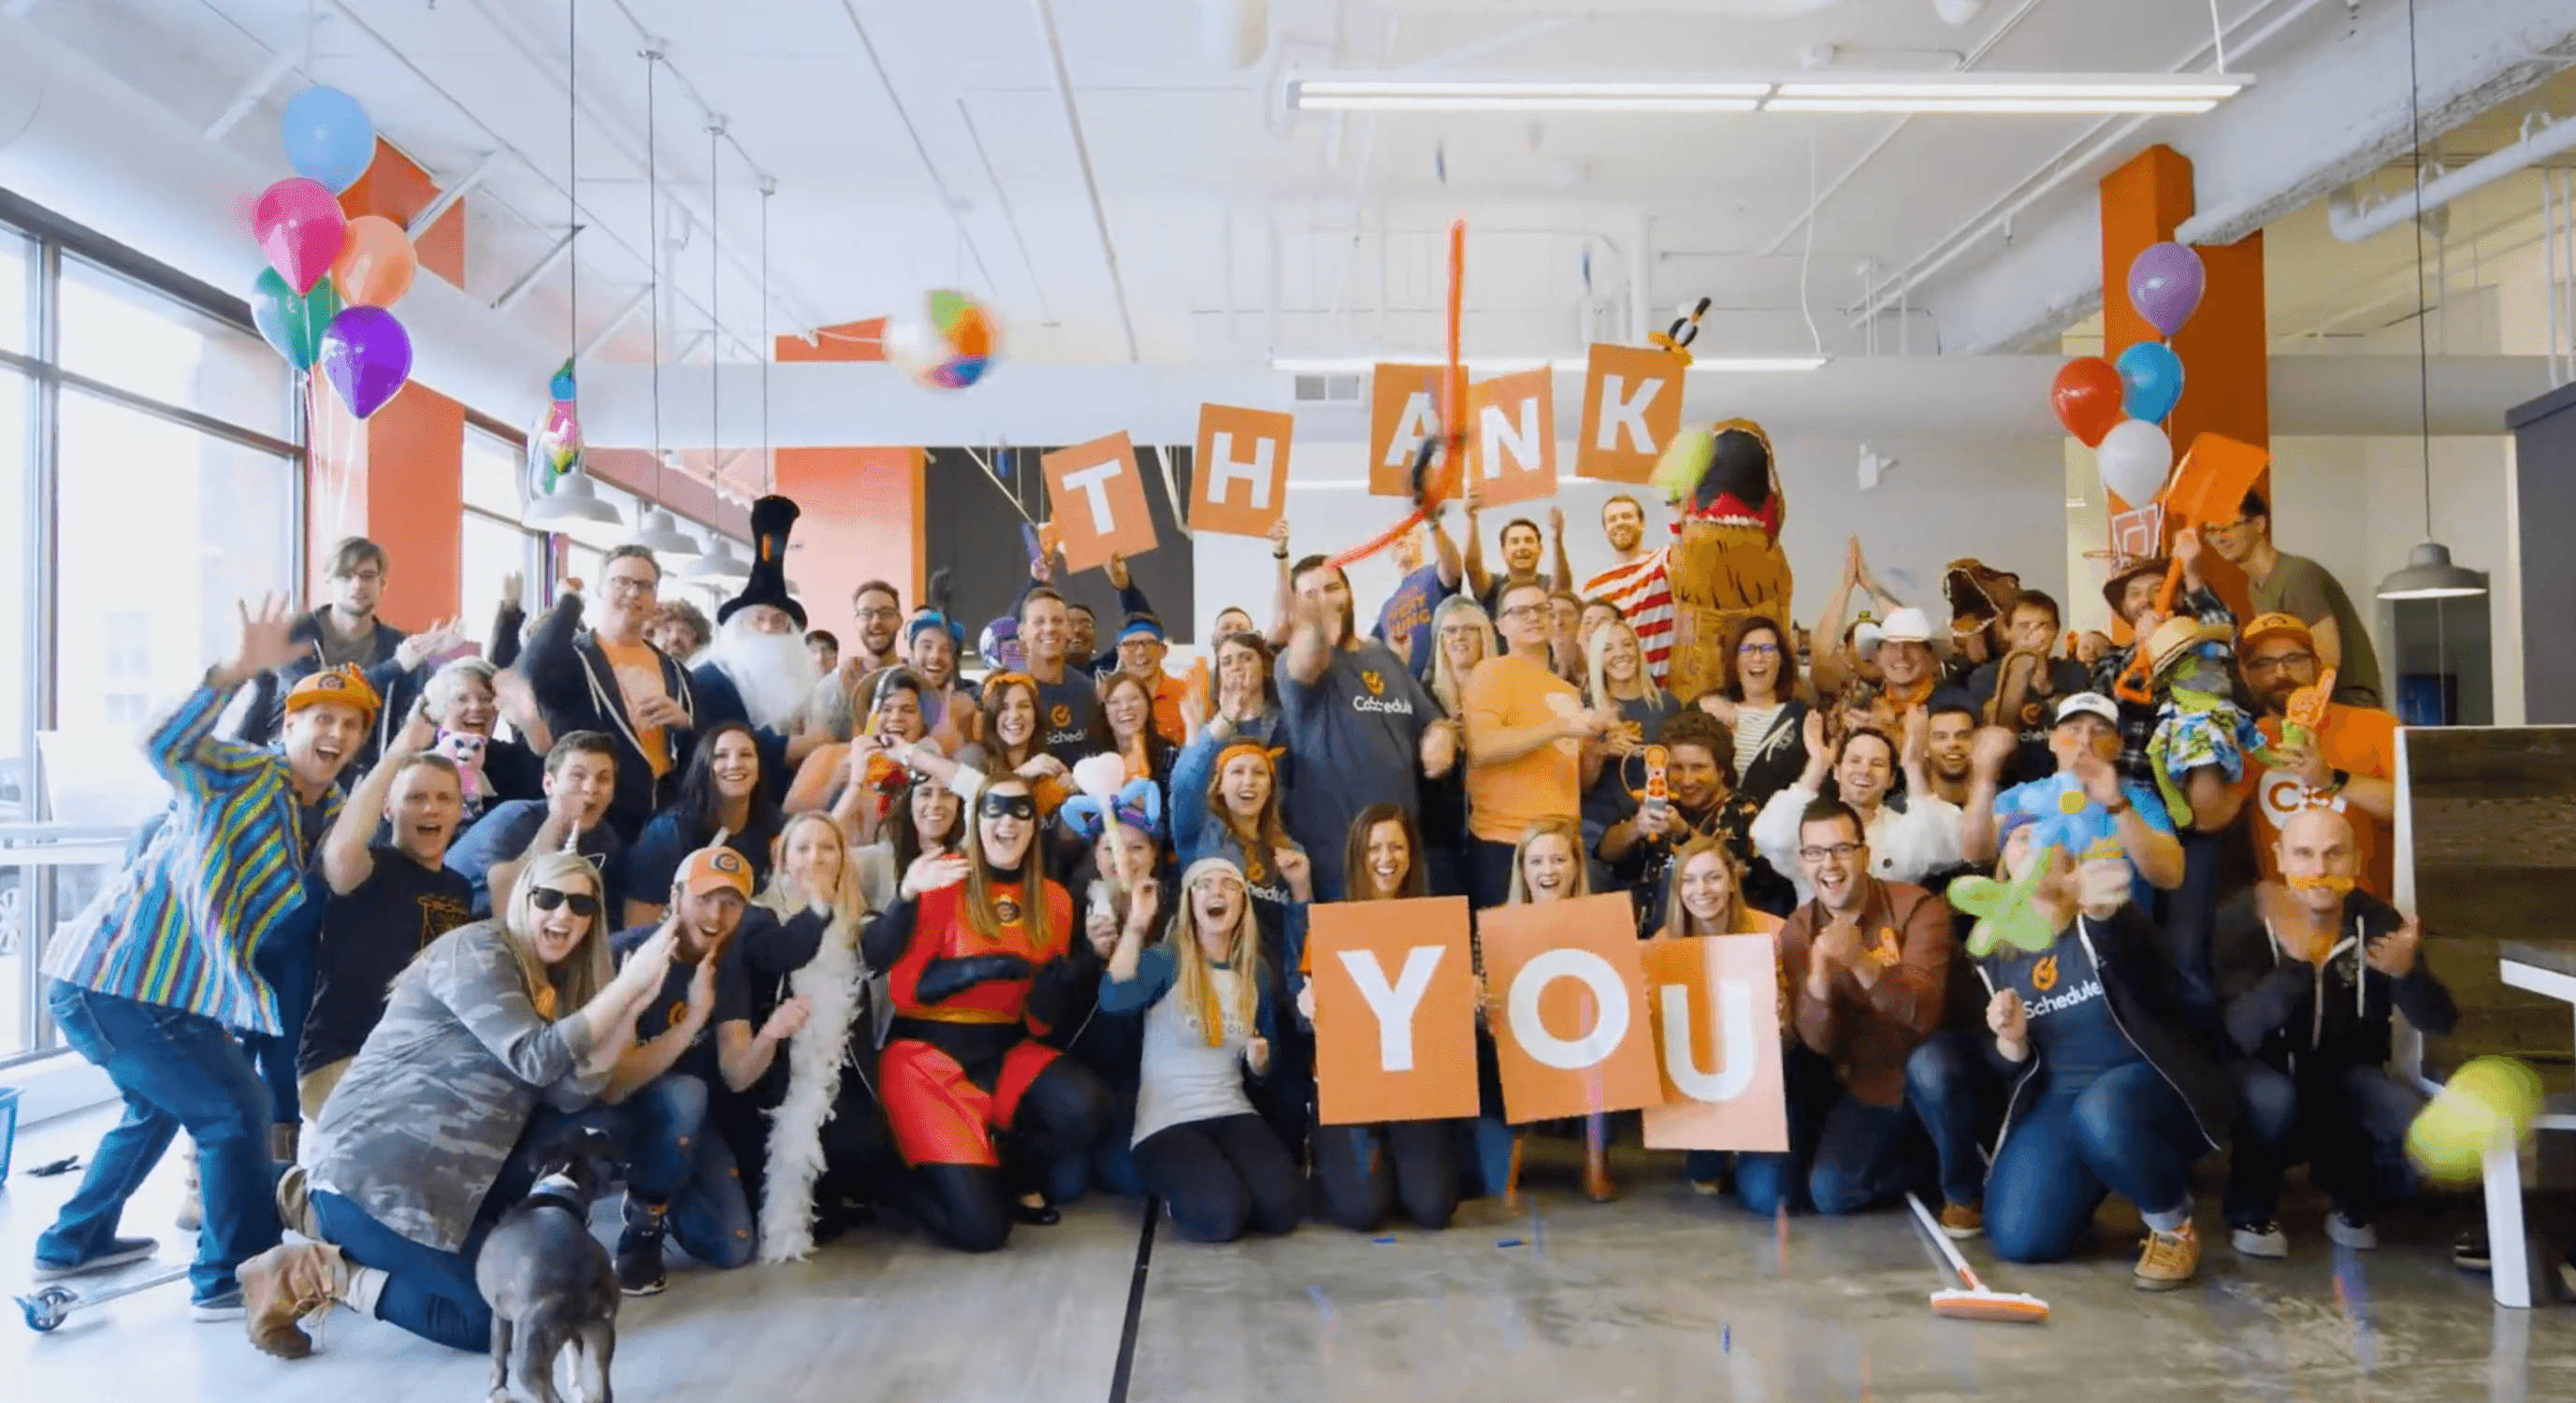 coschedule employees hold up "thank you" signs having a group picture and smiling